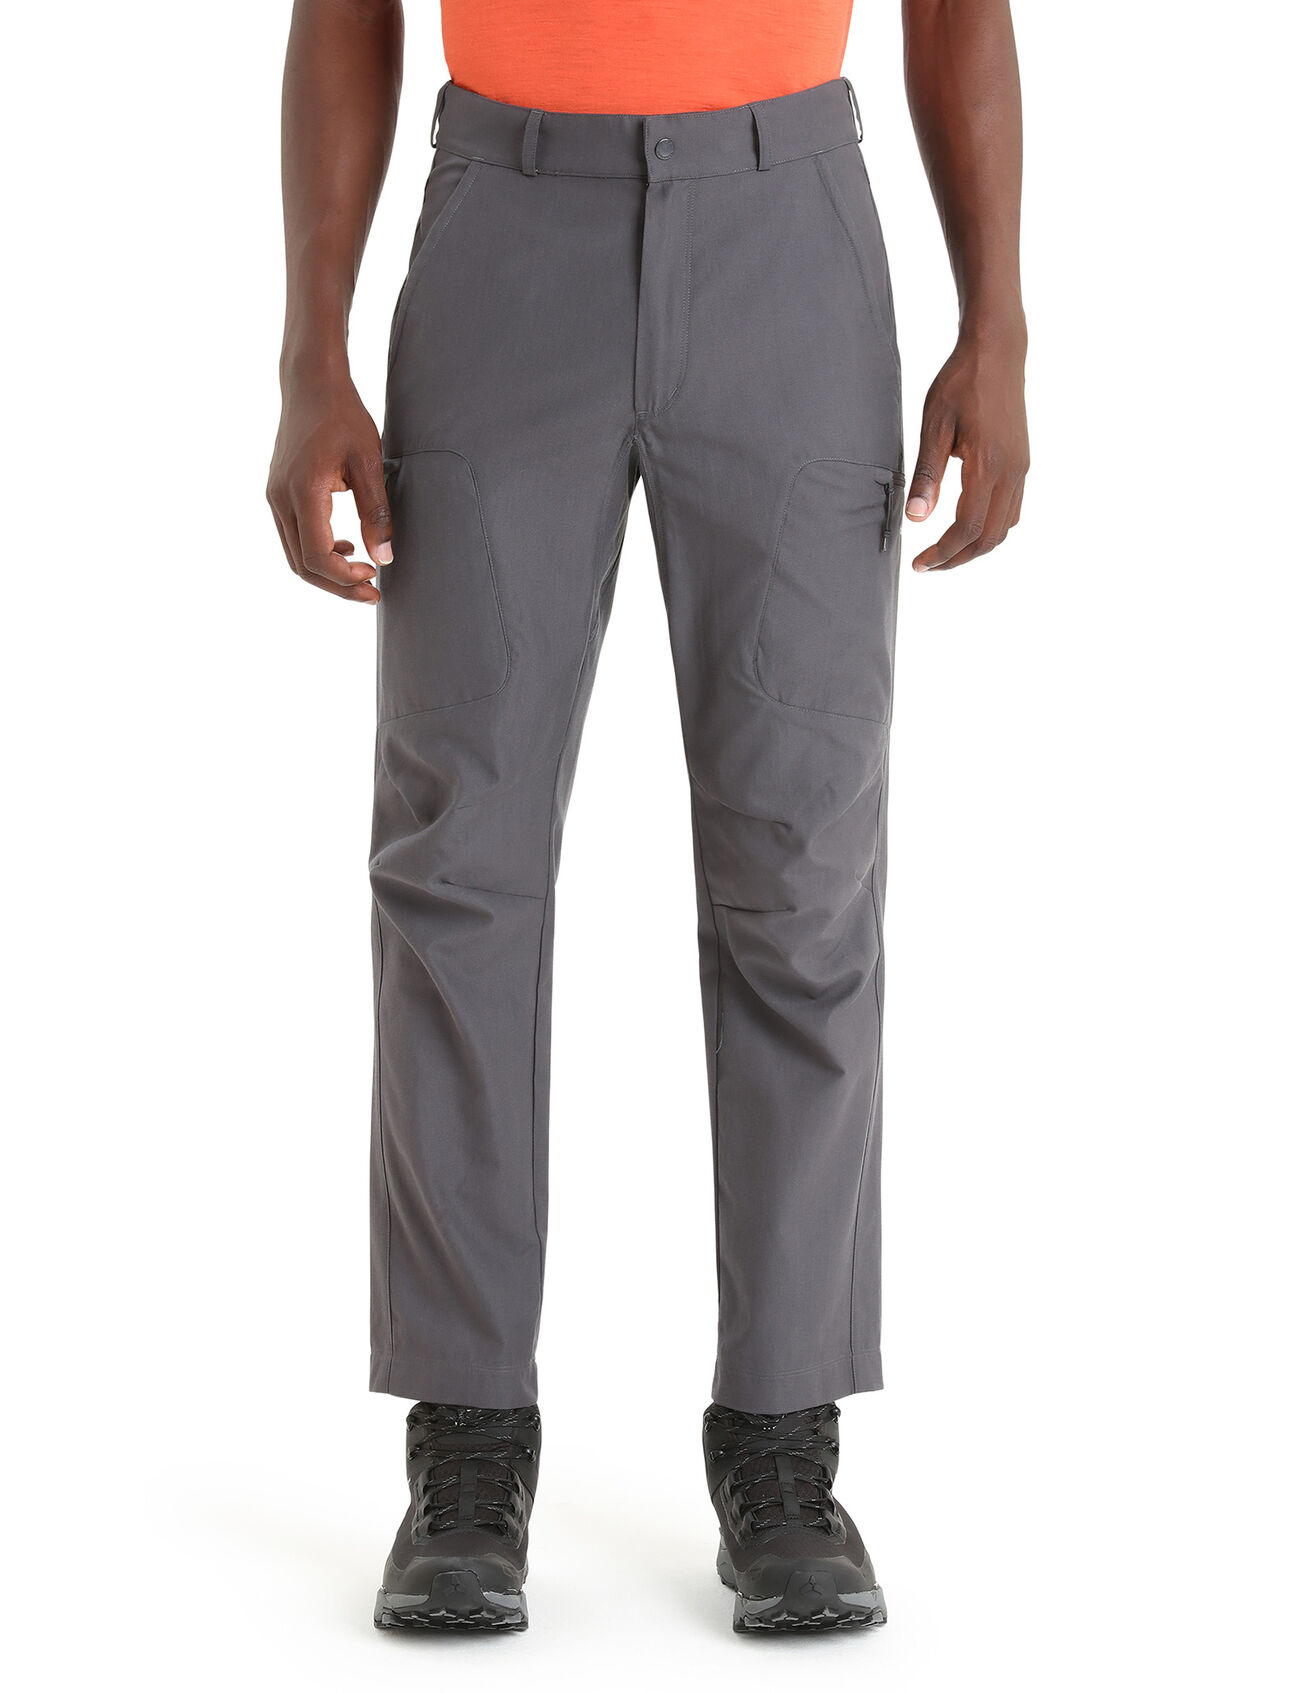 Mens Merino Hike Trousers A durable and dependable mountain pant made from a unique blend of merino wool and organically grown cotton, the Hike Pants are perfect for mountain adventures of all kinds.